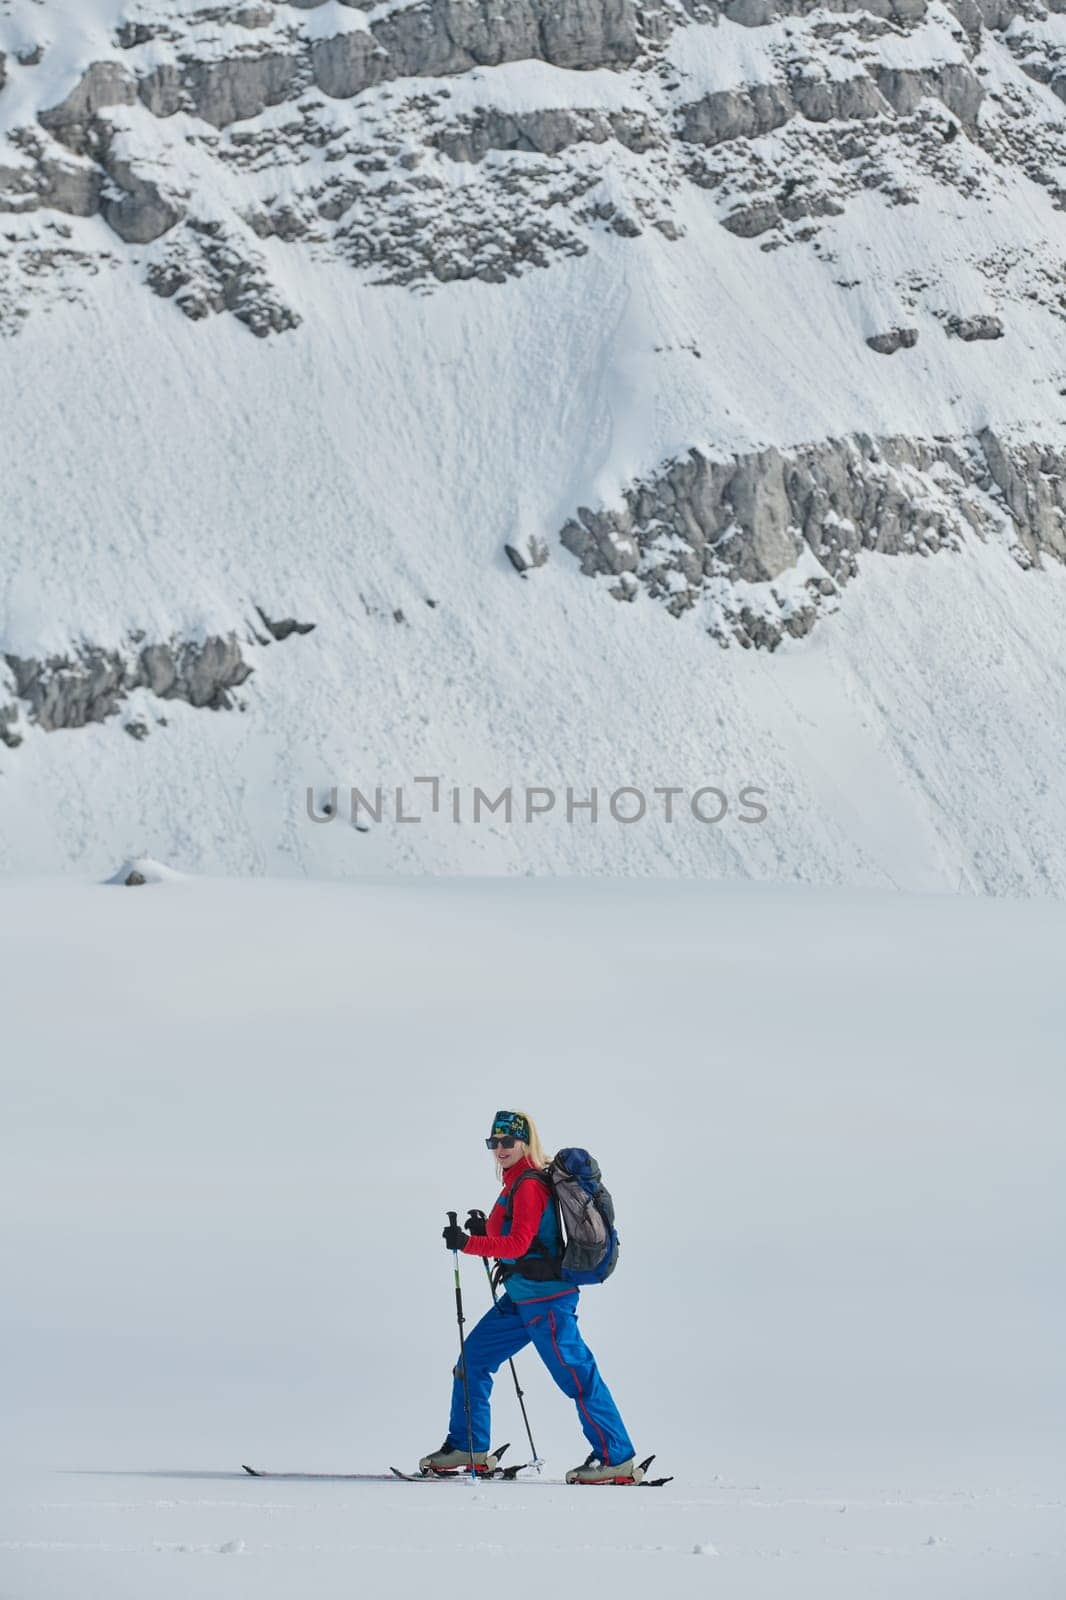 A female skier stands at the snowy summit of a mountain, equipped with professional gear and skis, poised for an exhilarating descent. by dotshock